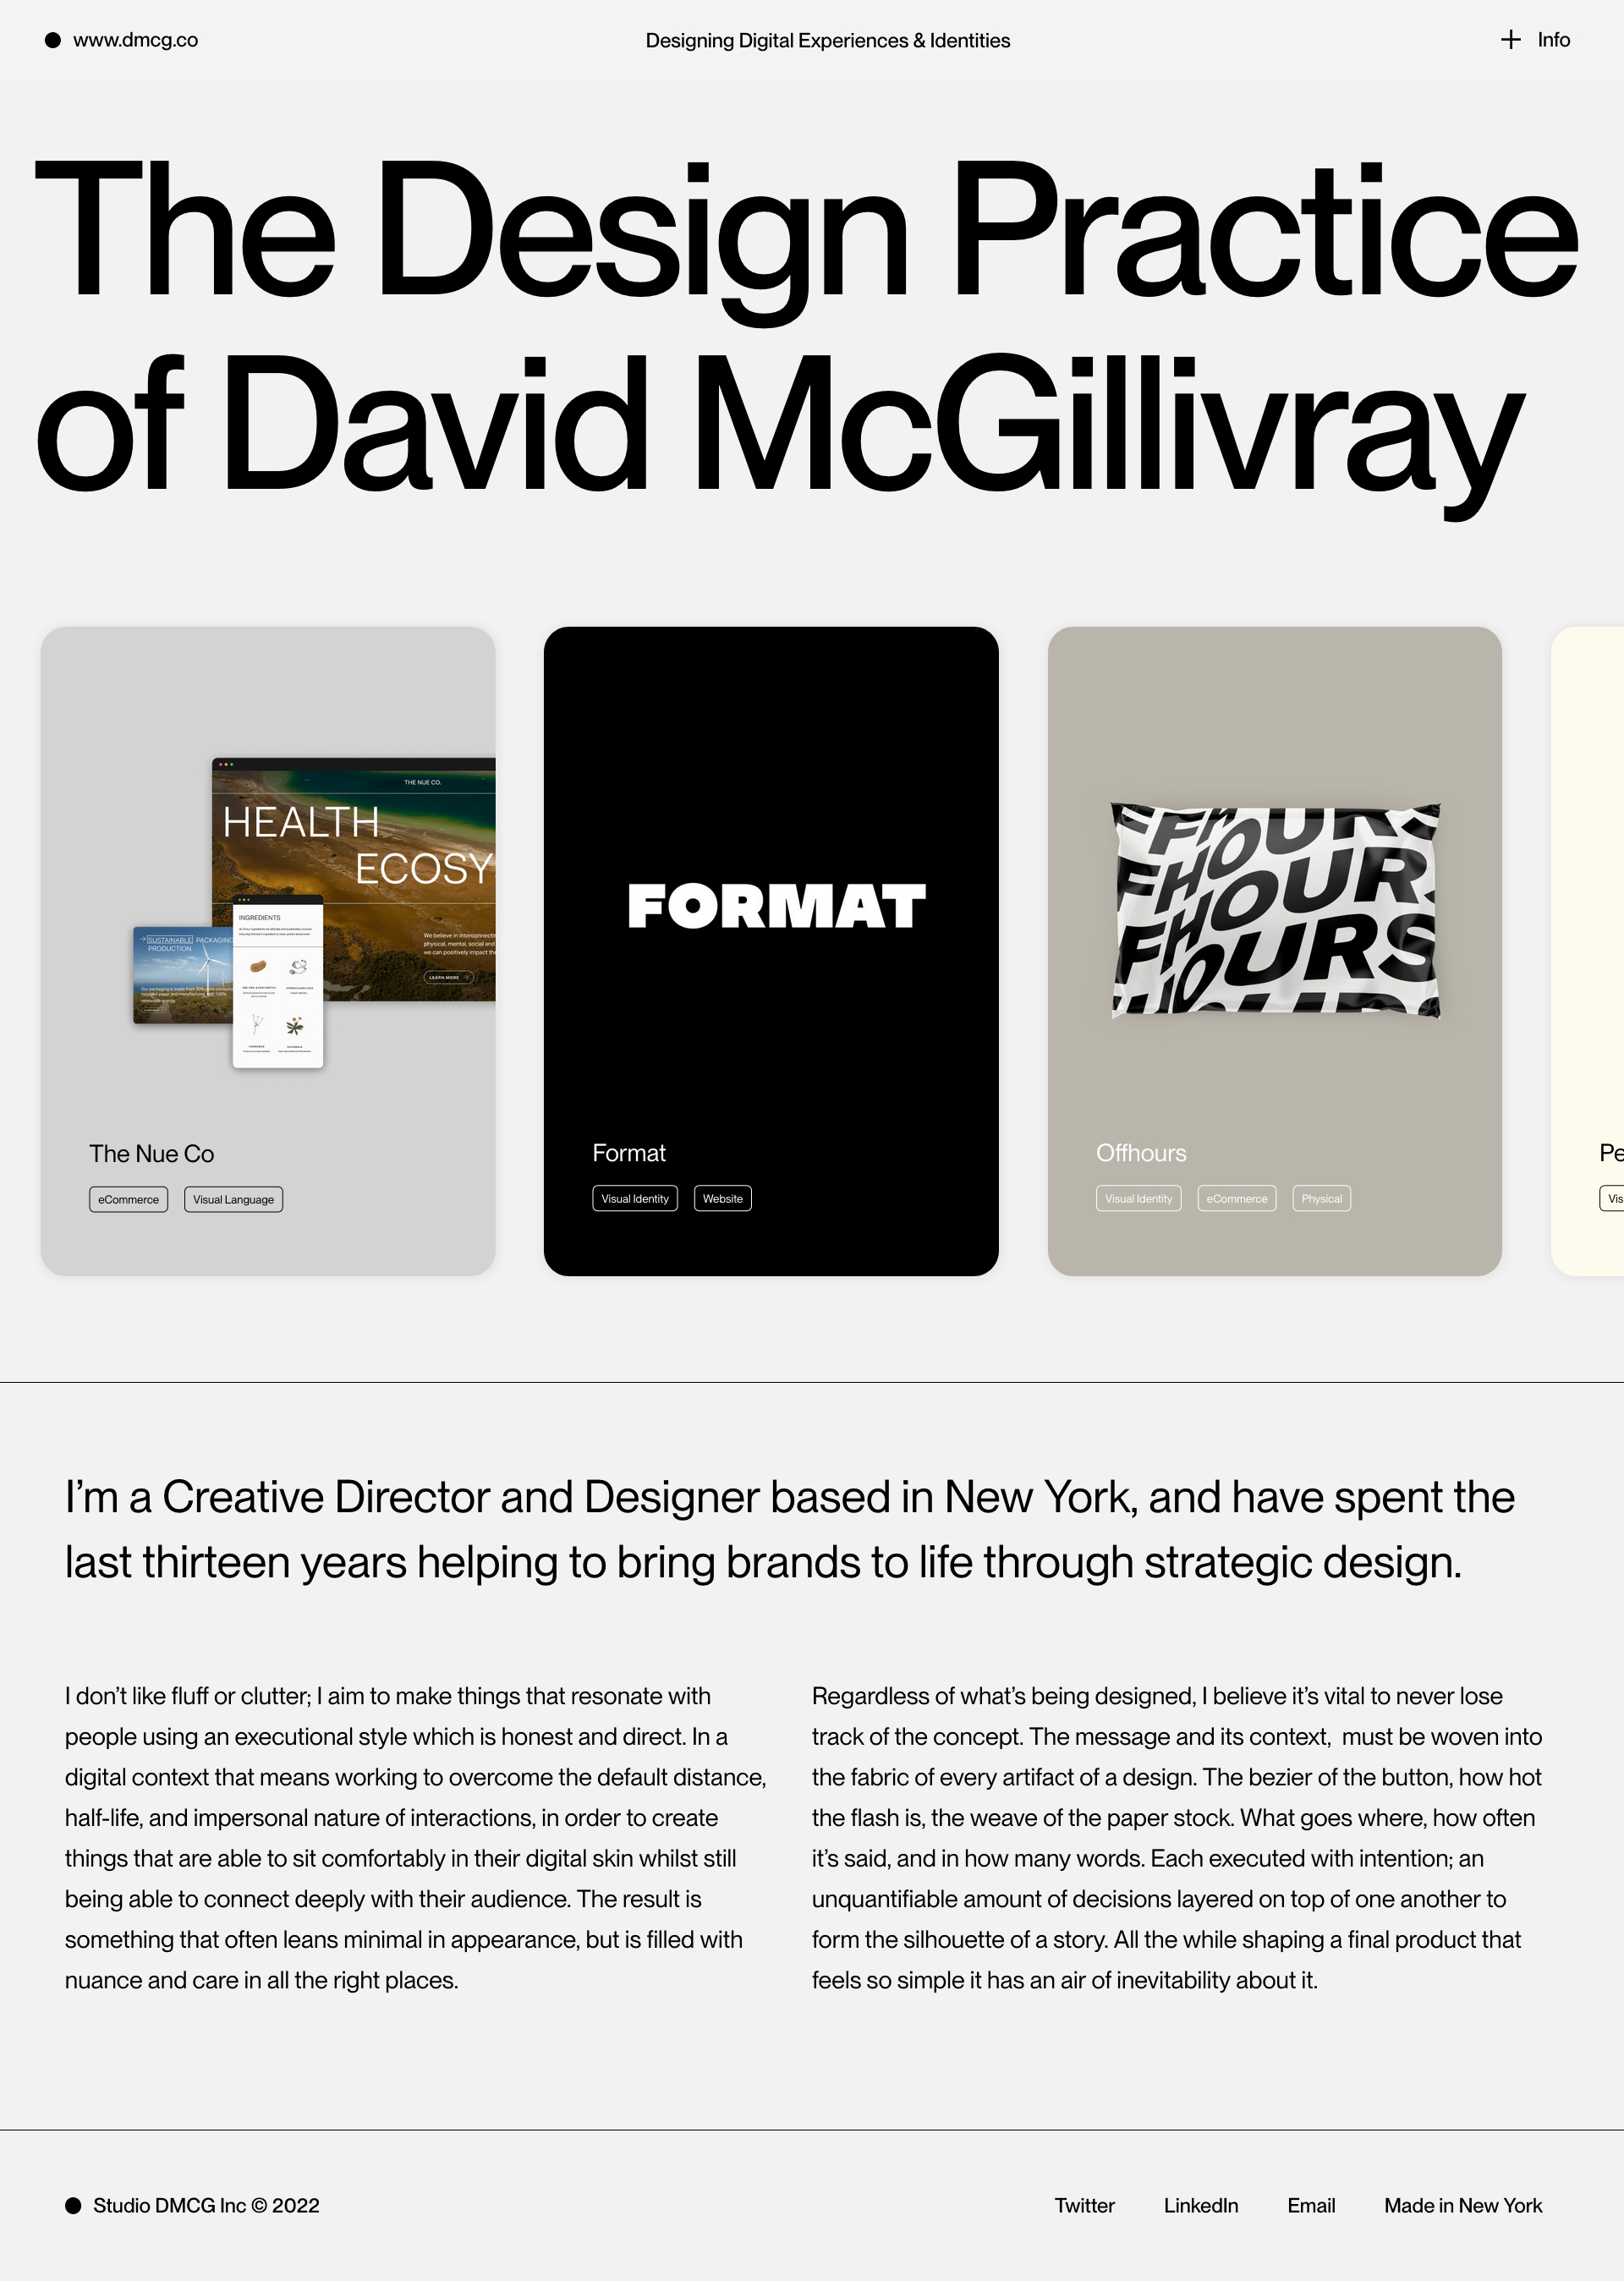 David McGillivray Landing Page Example: Hello, I’m David McGillivray; a Creative Director based in New York City. I’ve spent over a decade helping to bring brands to life through strategic design.